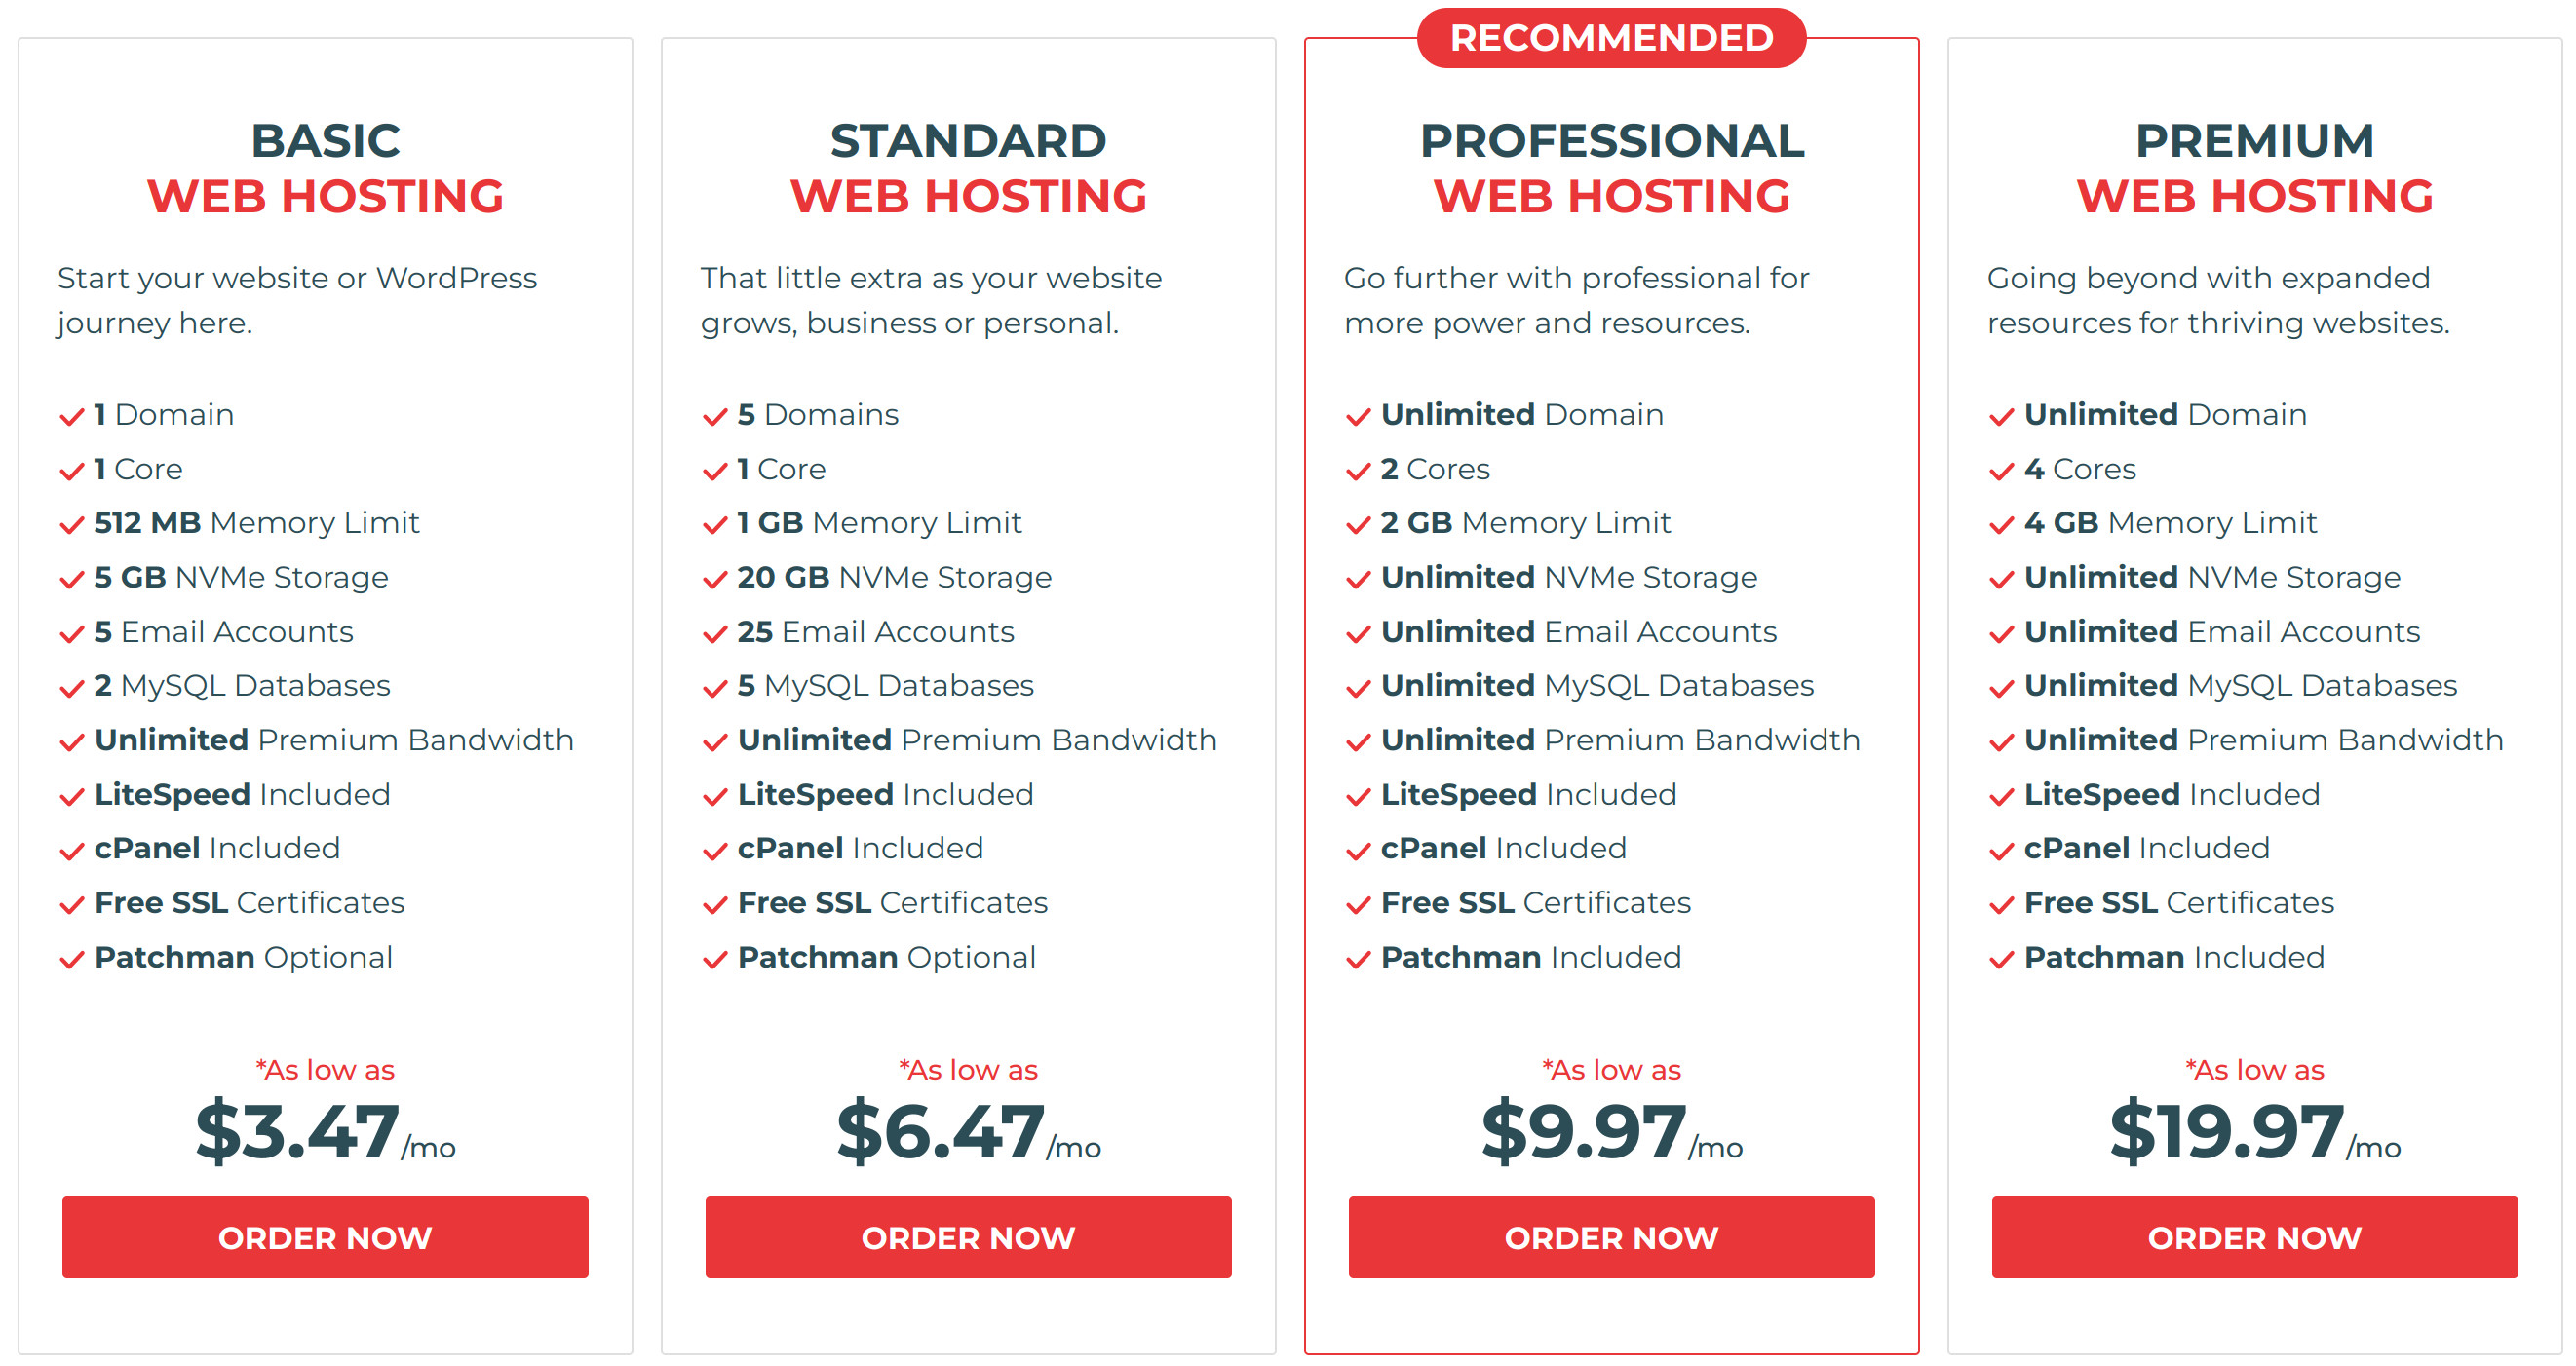 Knownhost's web hosting prices